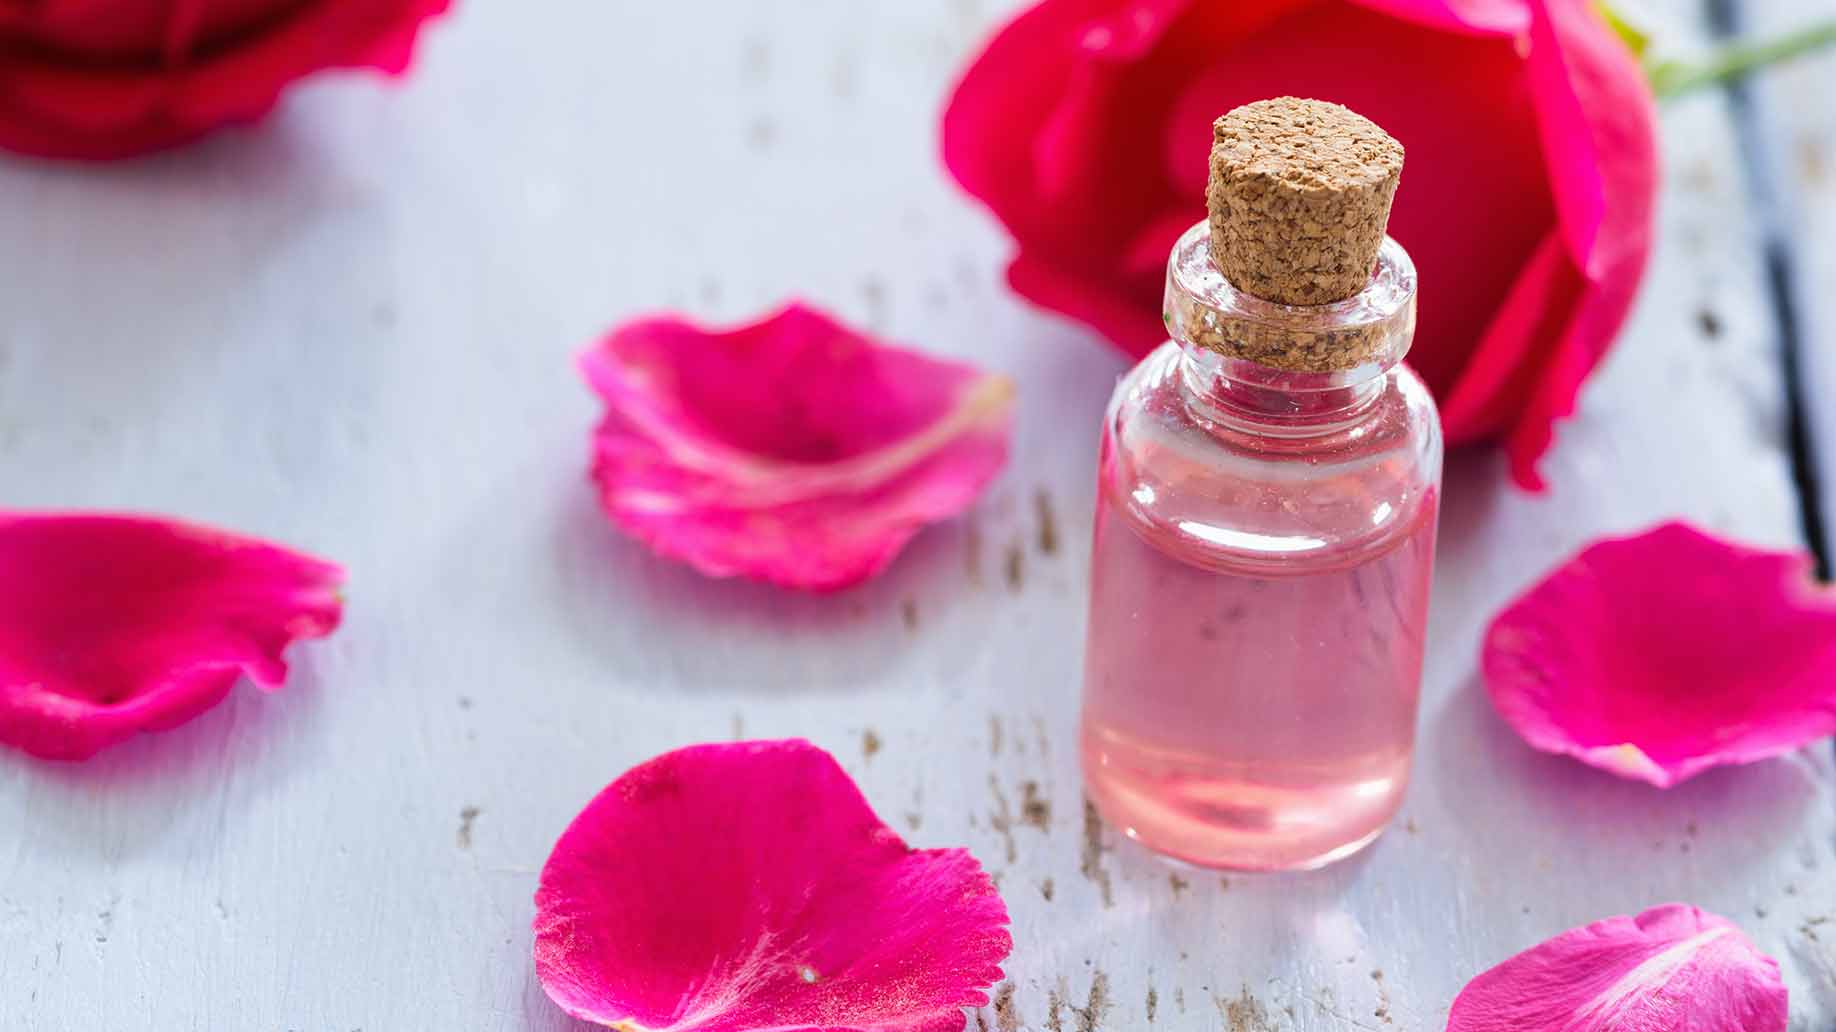 rose essential oil natural health benefits anxiety calm blood pressure antibacterial relaxation aromatherpy